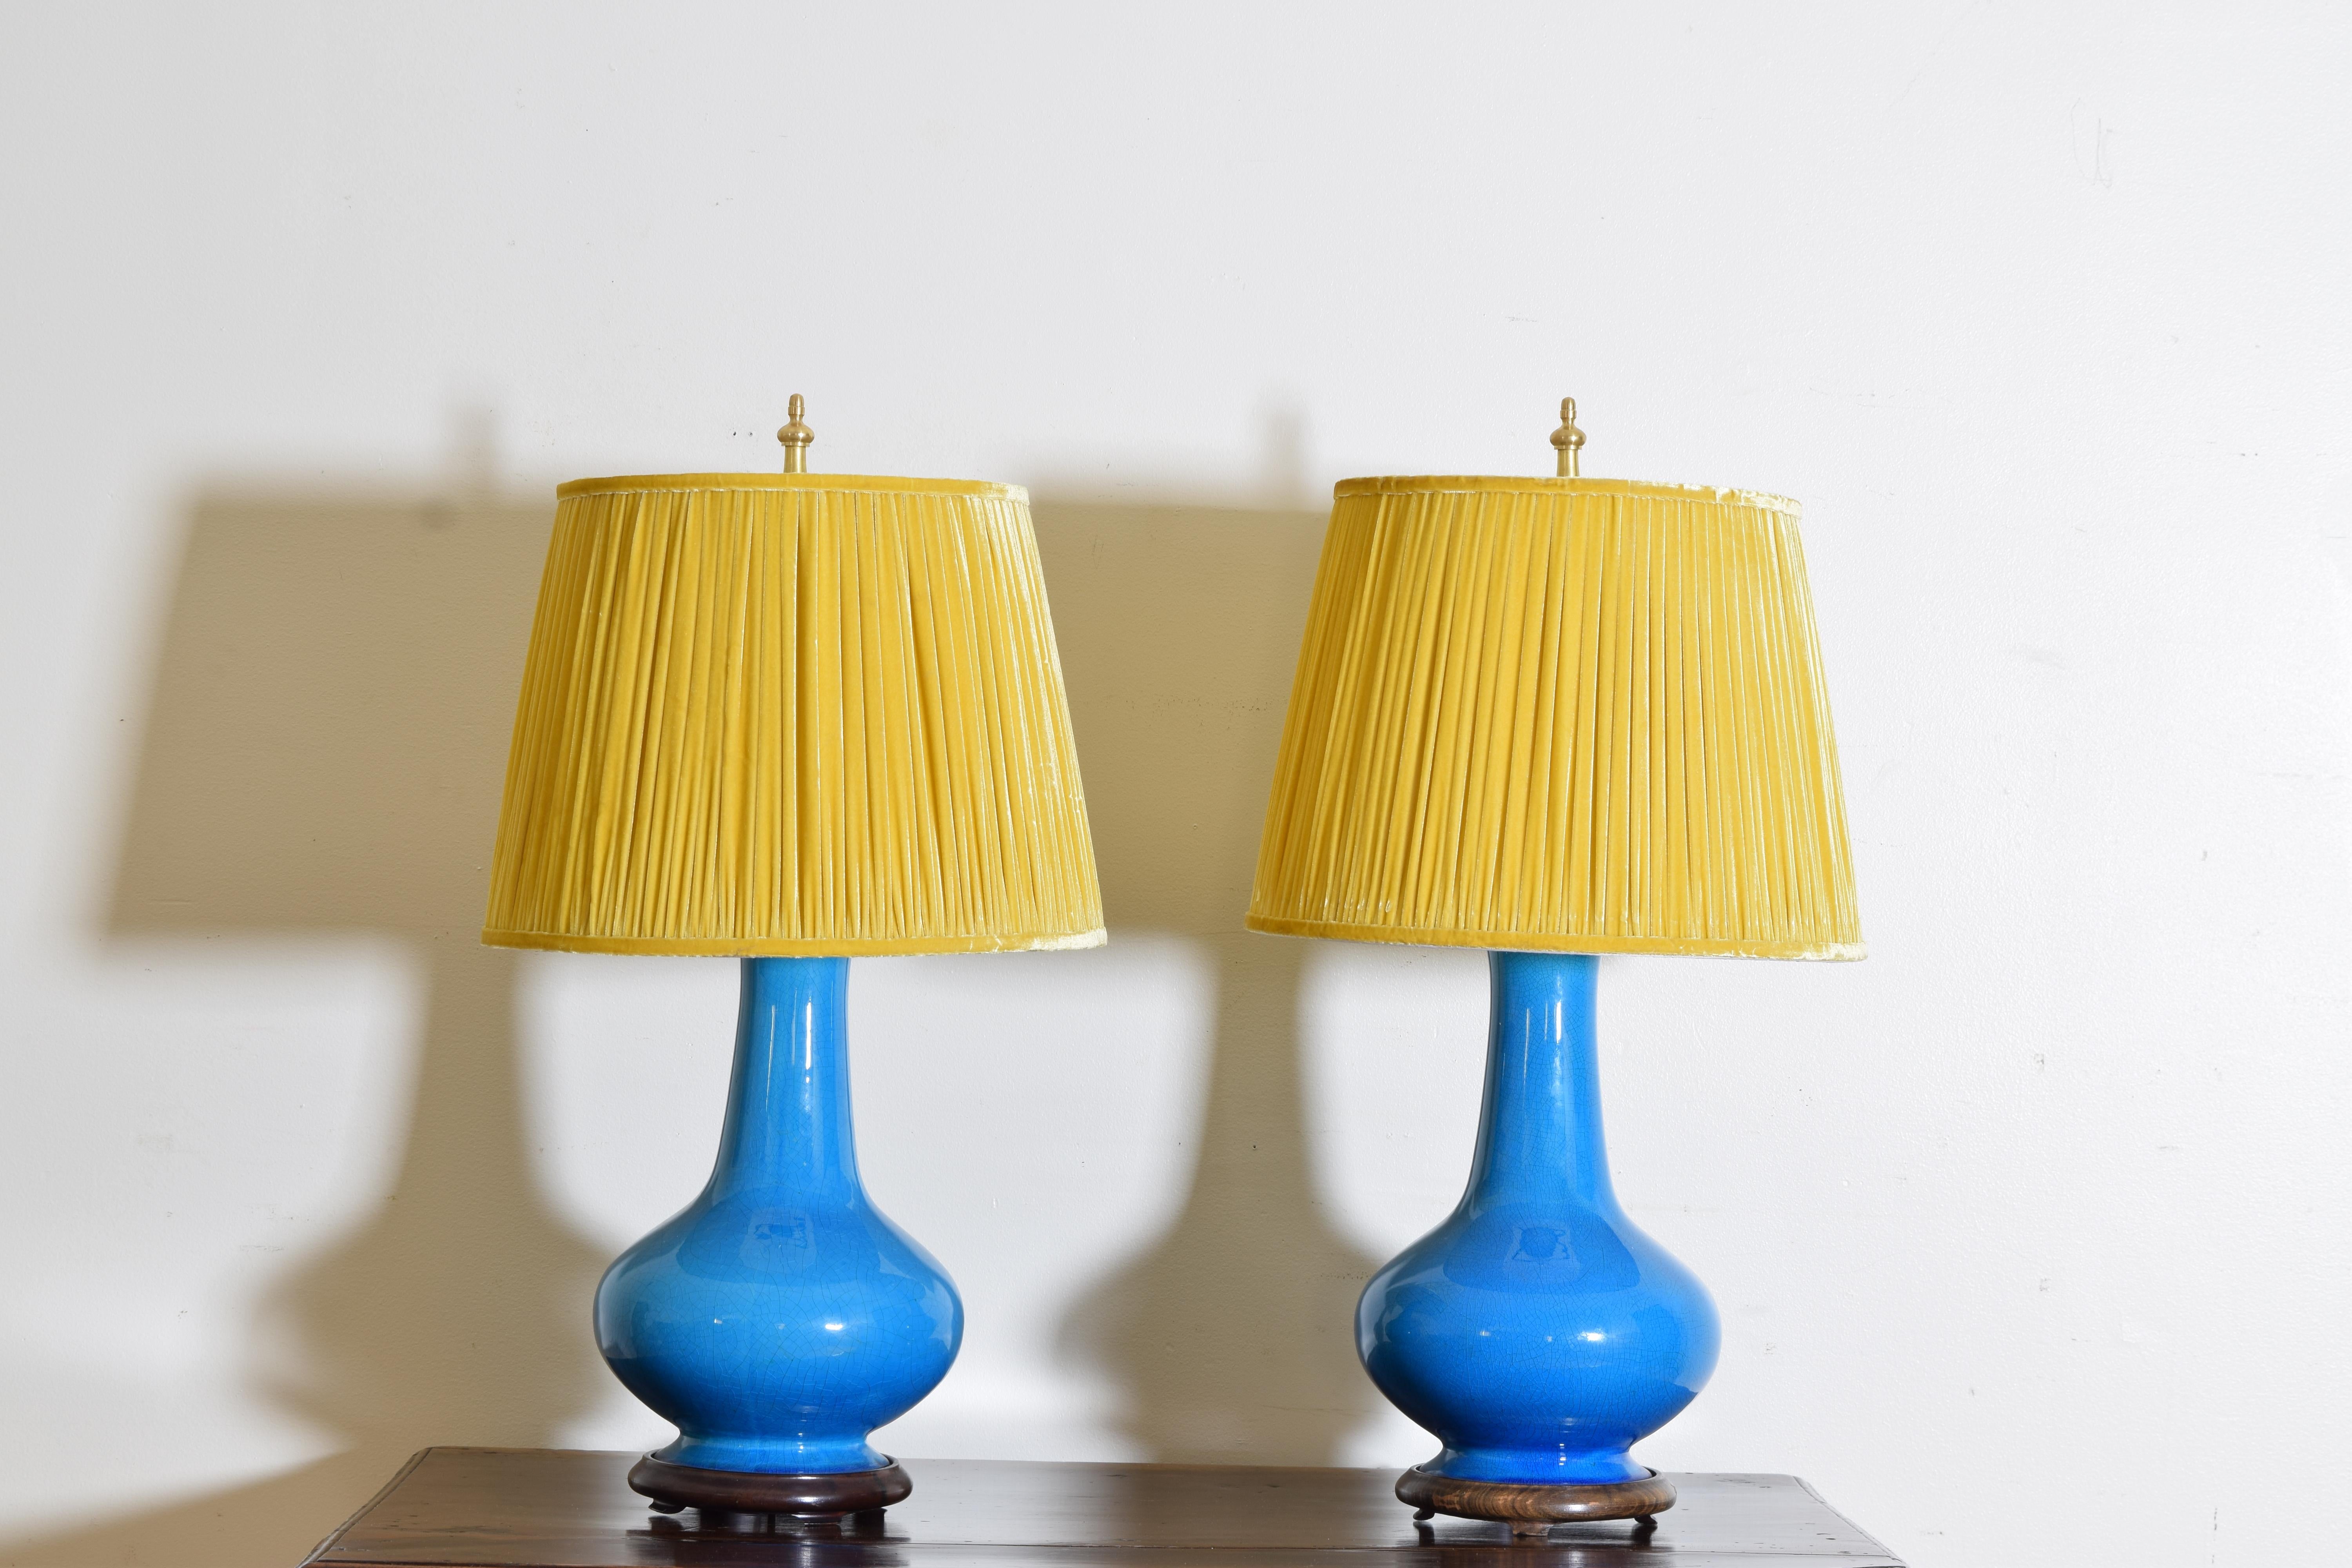 Pair of Porcelain Baluster-form table lamps beautifully glazed in a cerulean blue crackle finish. Raised on a wood base with brass hardware and harps.  The custom saffron yellow velvet pleated shades are meticulously detailed and stunning.